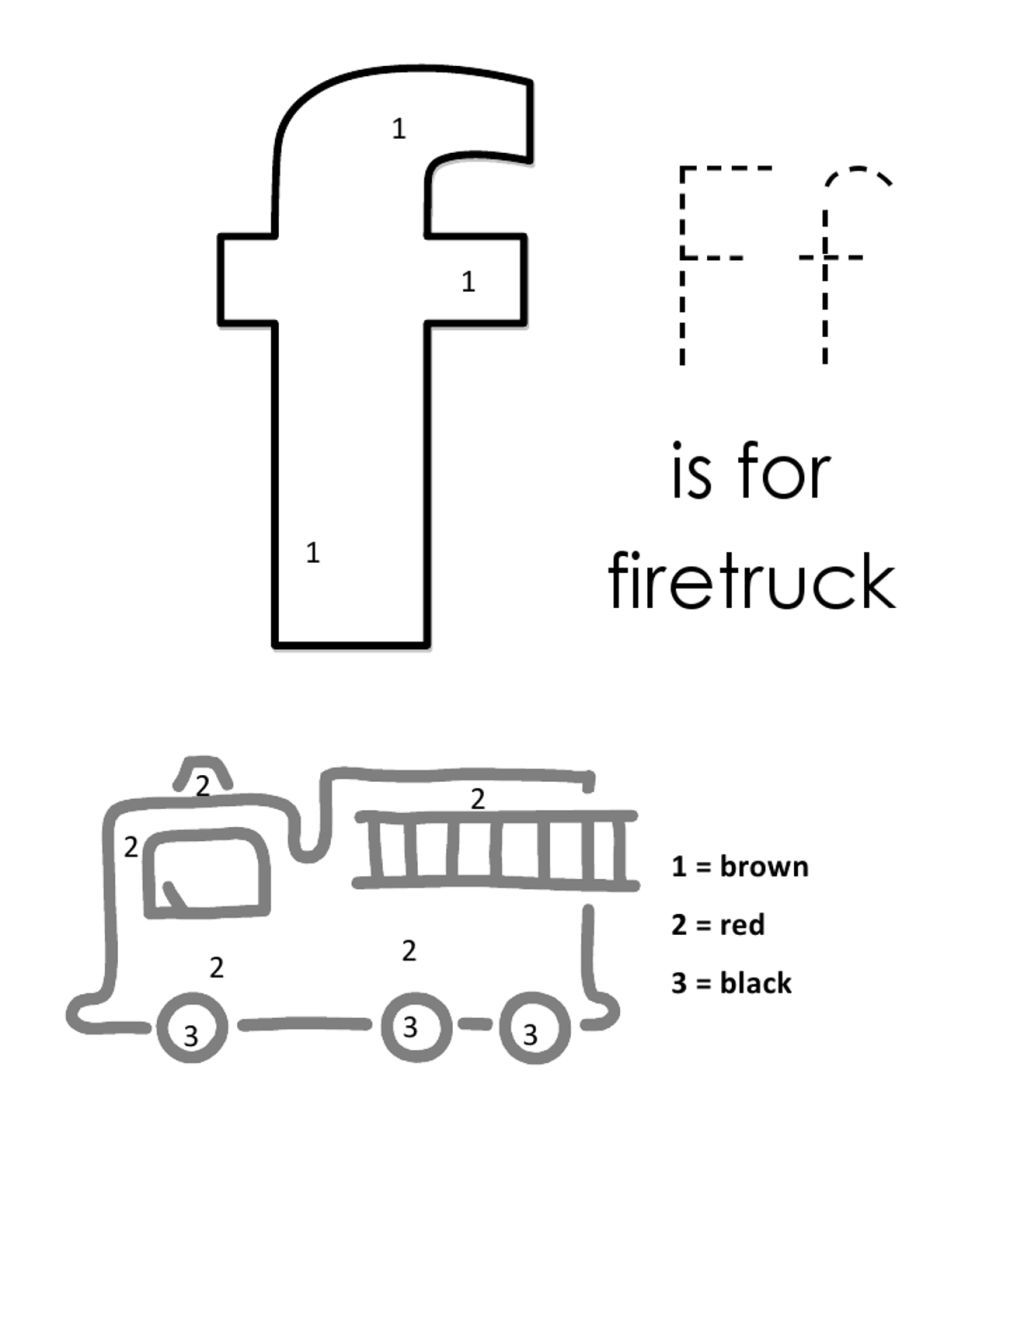 Truck Coloring Pages Â» Coloring Pages Kids